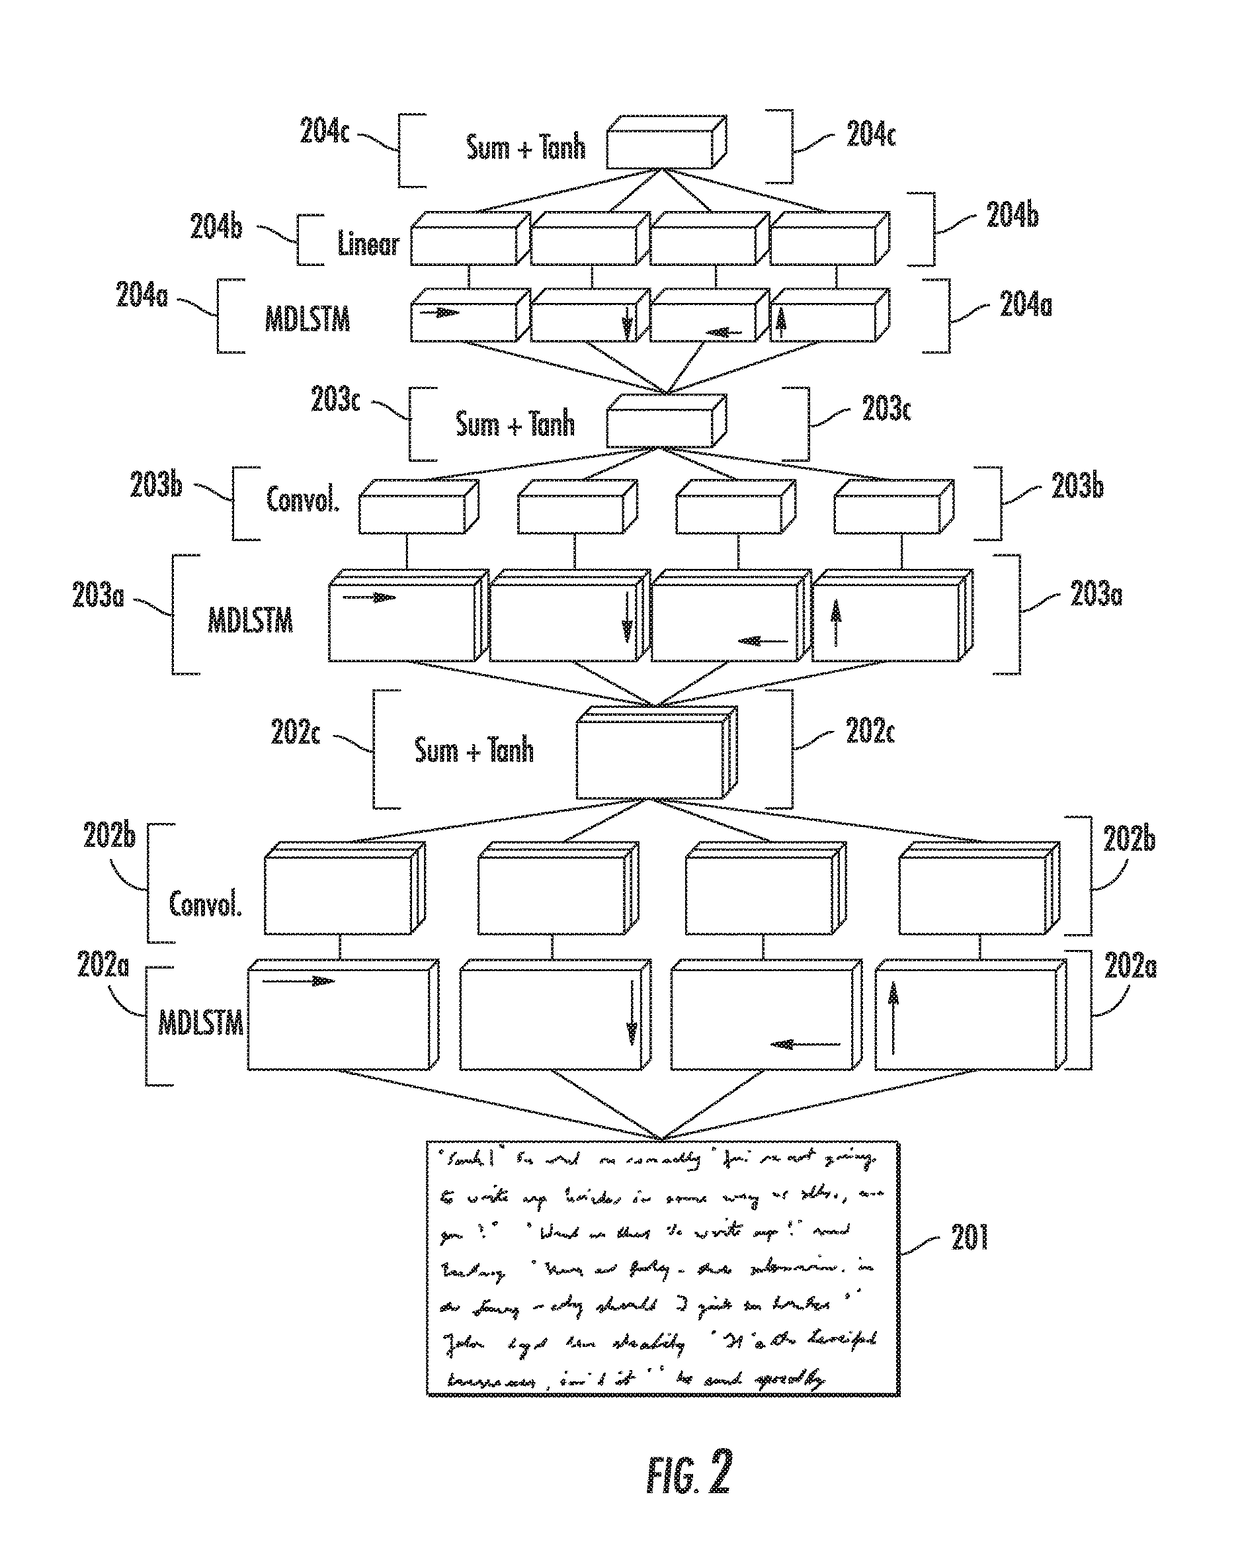 Systems and methods for recognizing characters in digitized documents